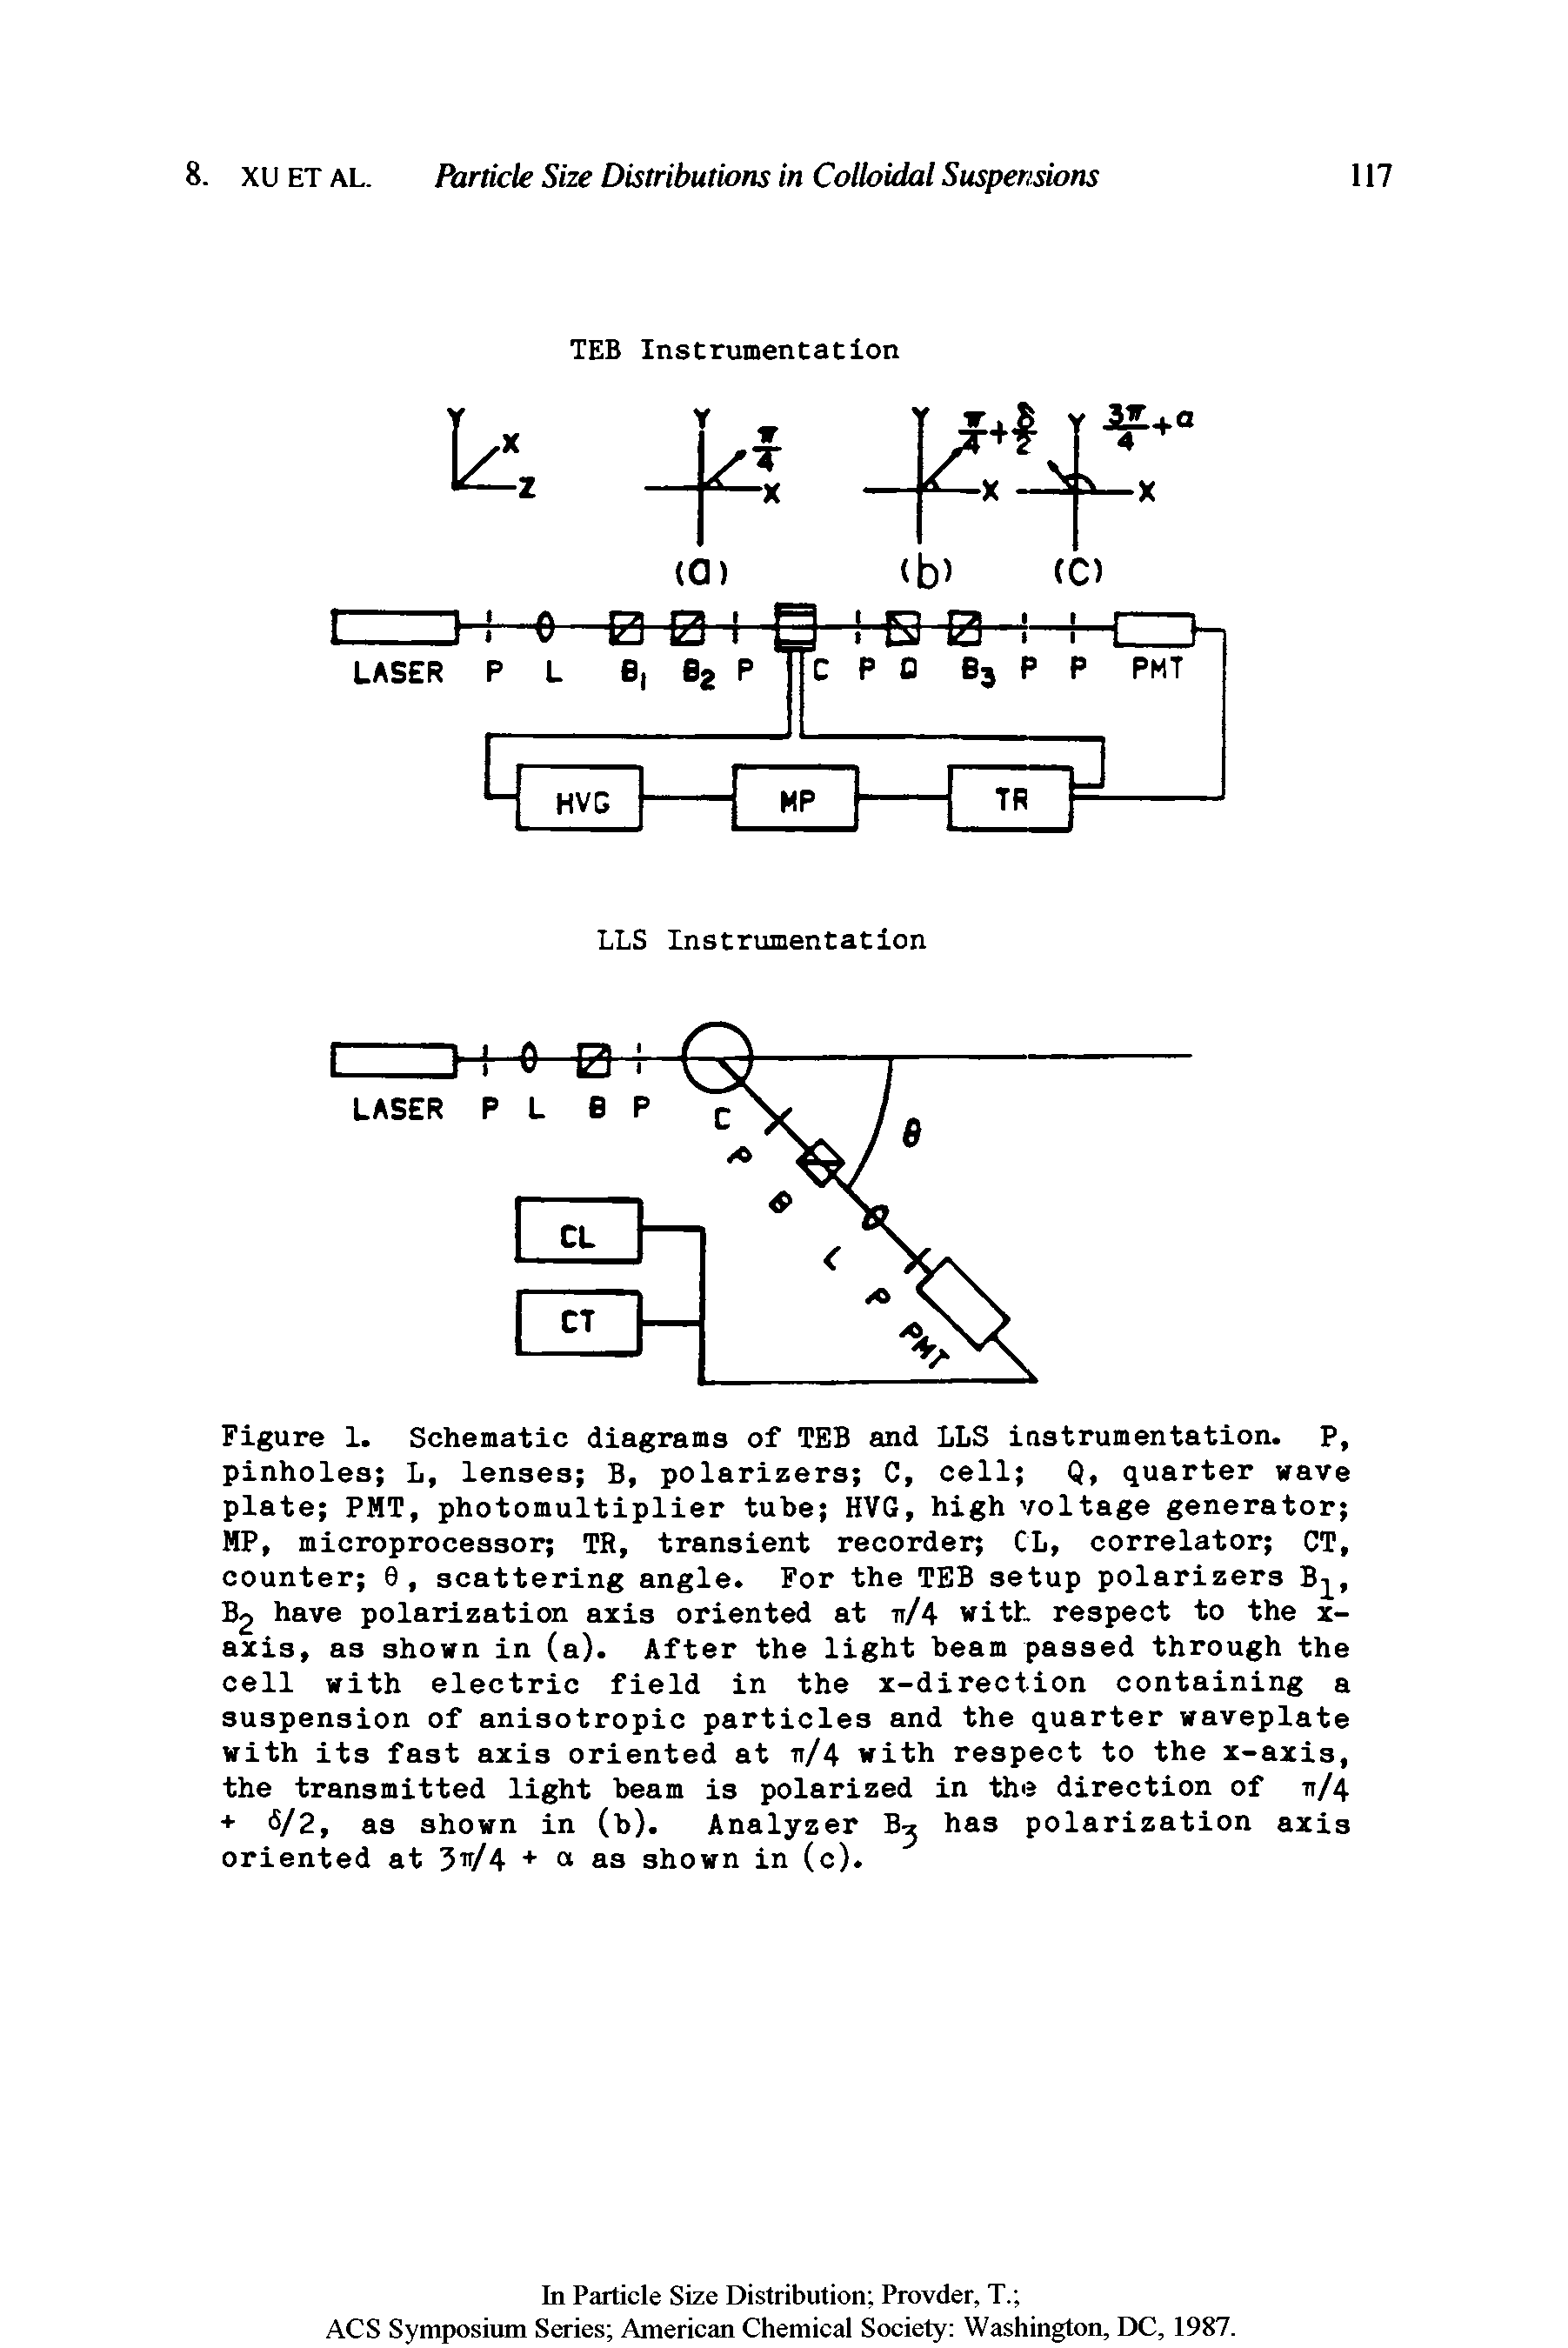 Figure 1. Schematic diagrams of TEB and LLS instrumentation. P, pinholes L, lenses B, polarizers C, cell Q, quarter wave plate PMT, photomultiplier tube HVG, high voltage generator MP, microprocessor TR, transient recorder CL, correlator CT, counter 6, scattering angle. For the TEB setup polarizers B-, B2 have polarization axis oriented at tt/4 with respect to the x-axis, as shown in (a). After the light beam passed through the cell with electric field in the x-direction containing a suspension of anisotropic particles and the quarter waveplate with its fast axis oriented at tt/4 with respect to the x-axis, the transmitted light beam is polarized in the direction of 71/4 + 6/2, as shown in (b). Analyzer B has polarization axis oriented at 3t/4 + a as shown in (c).